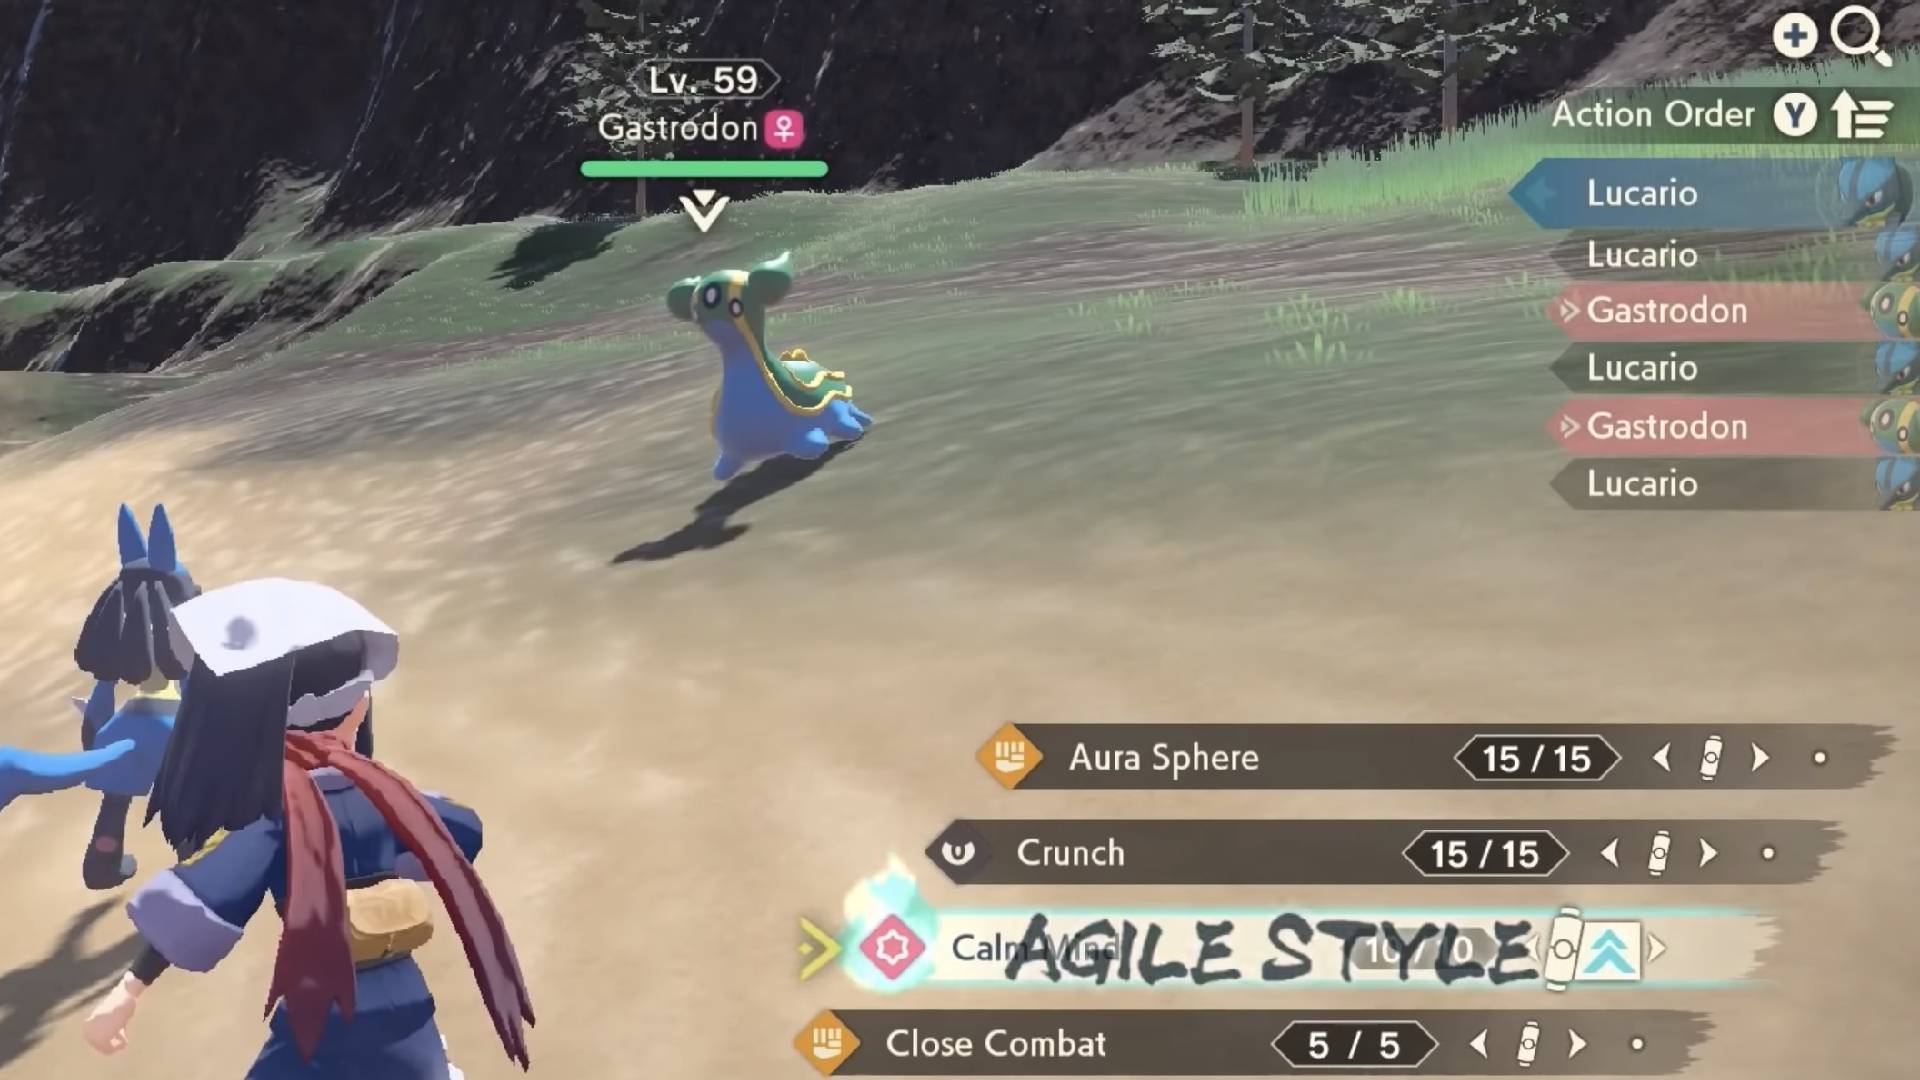 A pokemon trainer is using a Lucario to fight a wild Gastrodon, while the words "Agile Style" appear over a selected move